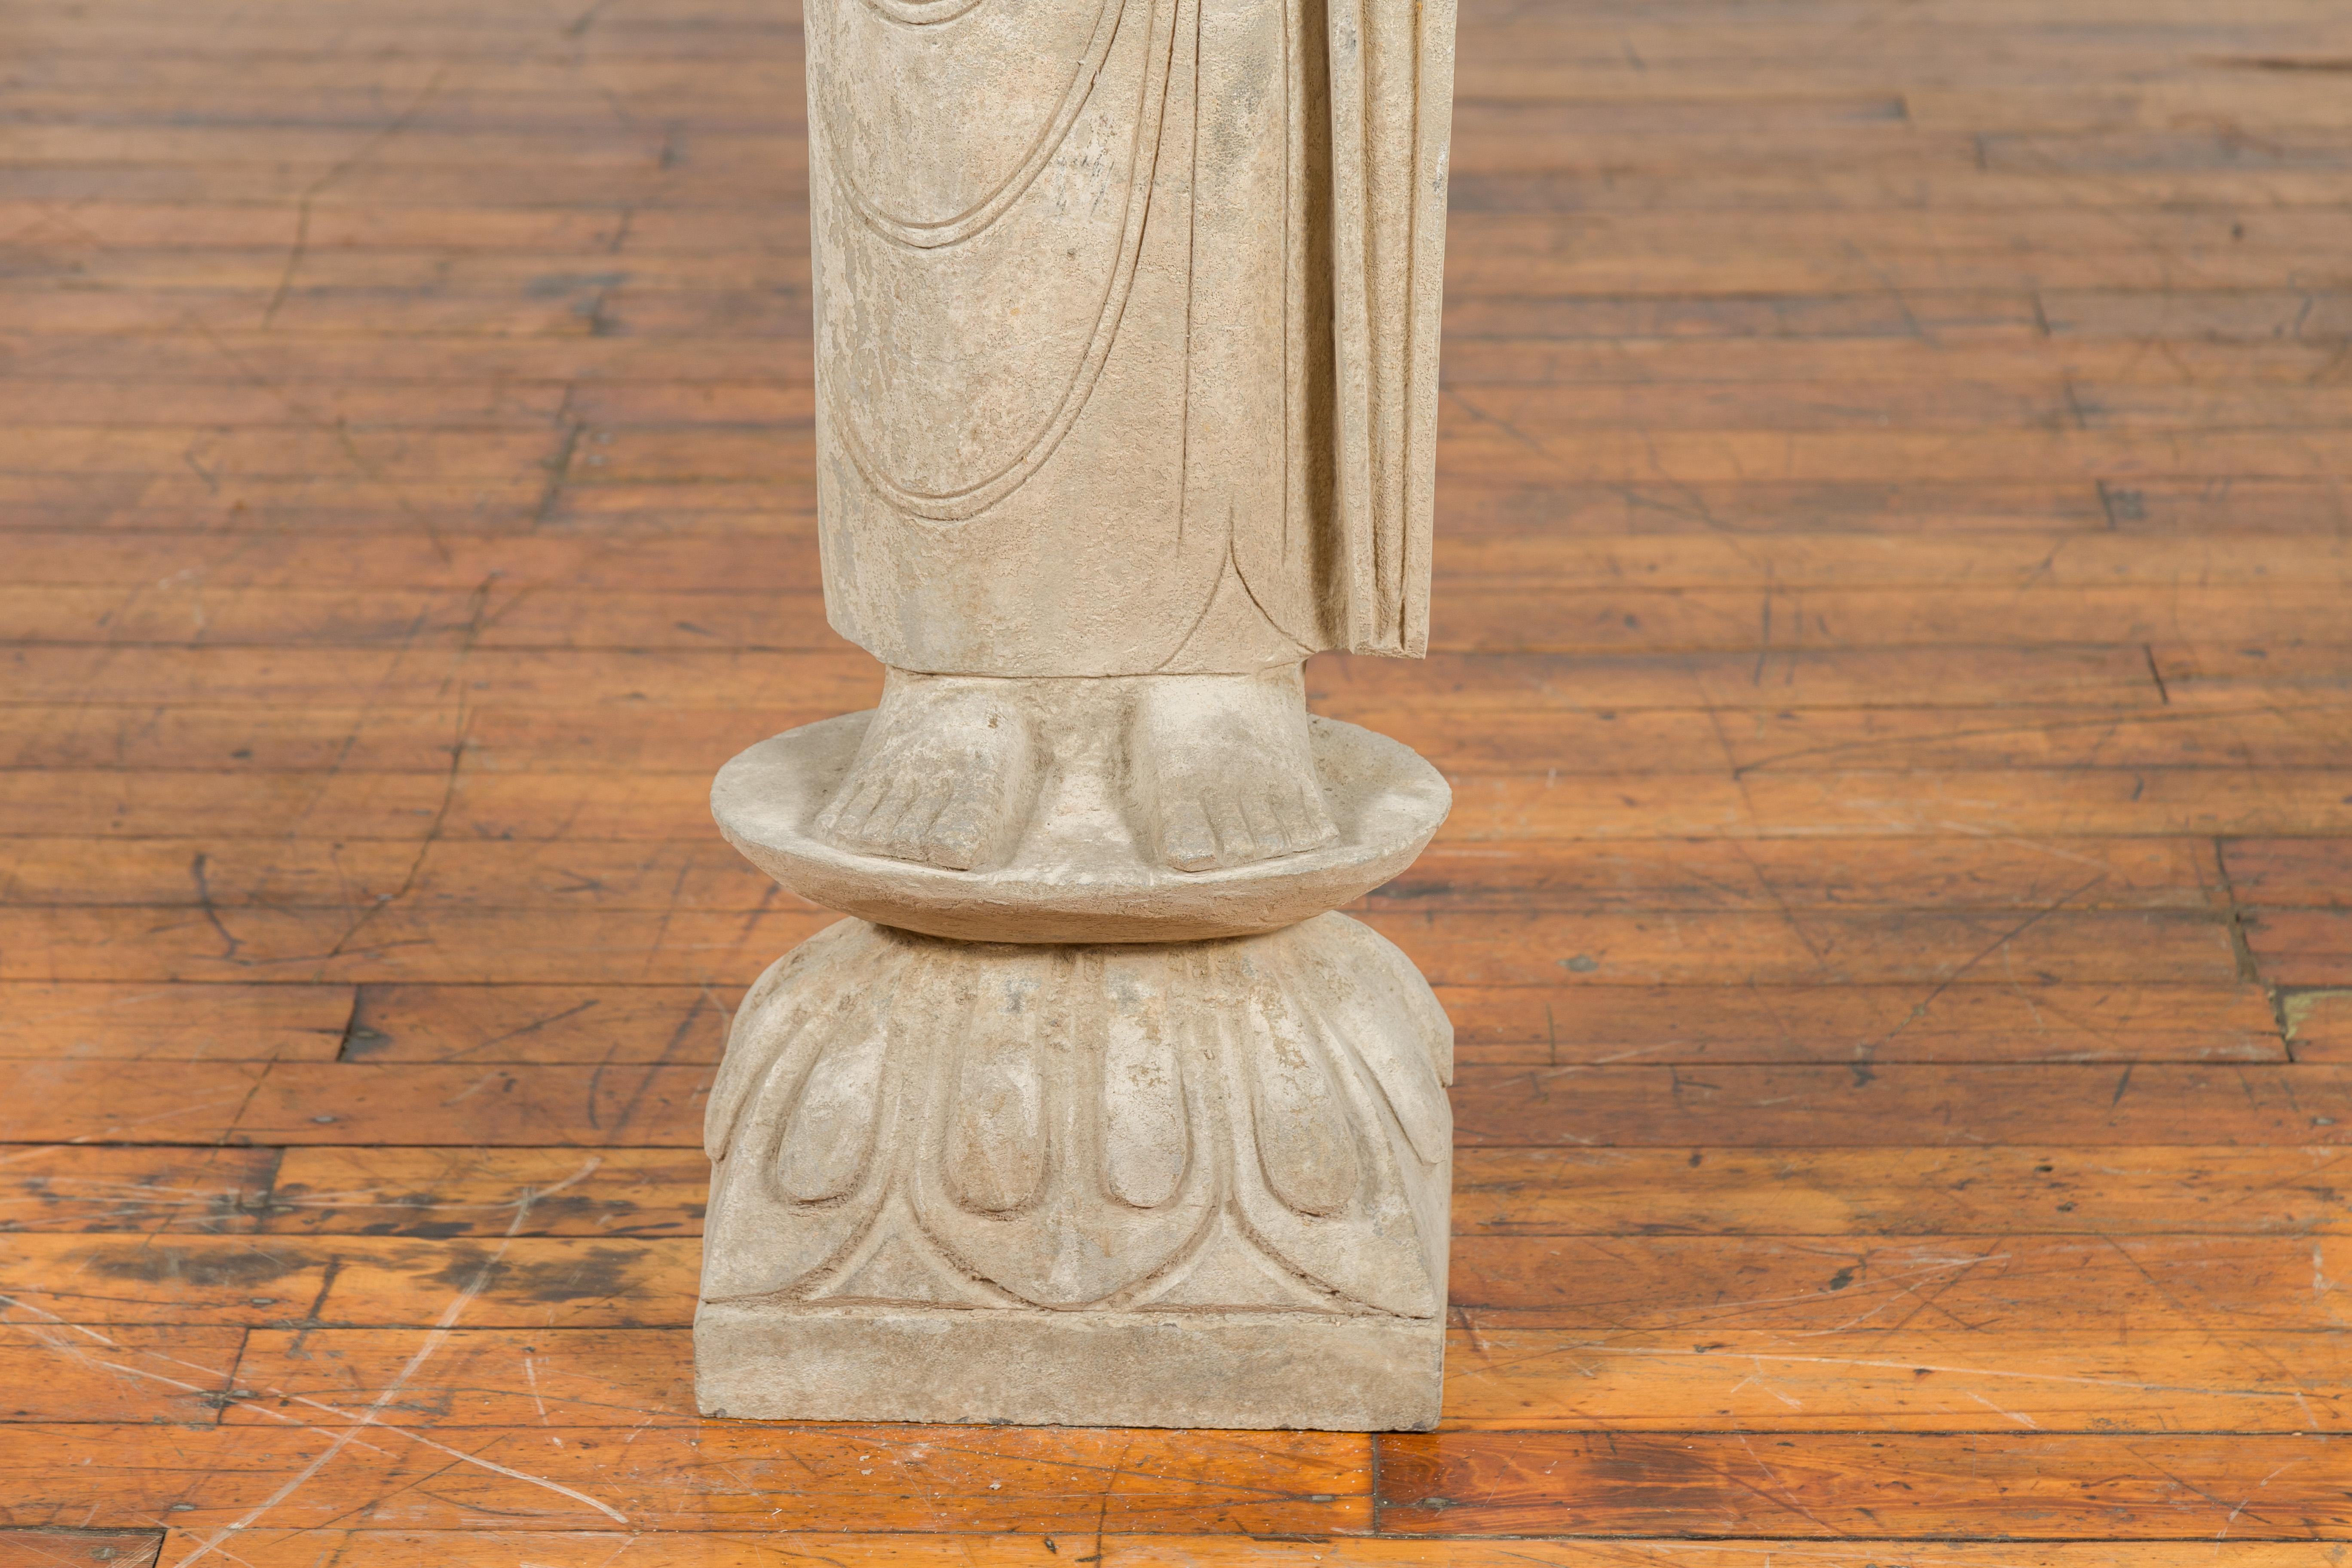 20th Century Vintage Chinese Stone Standing Buddha with Abhayamudrā Gesture of Fearlessness